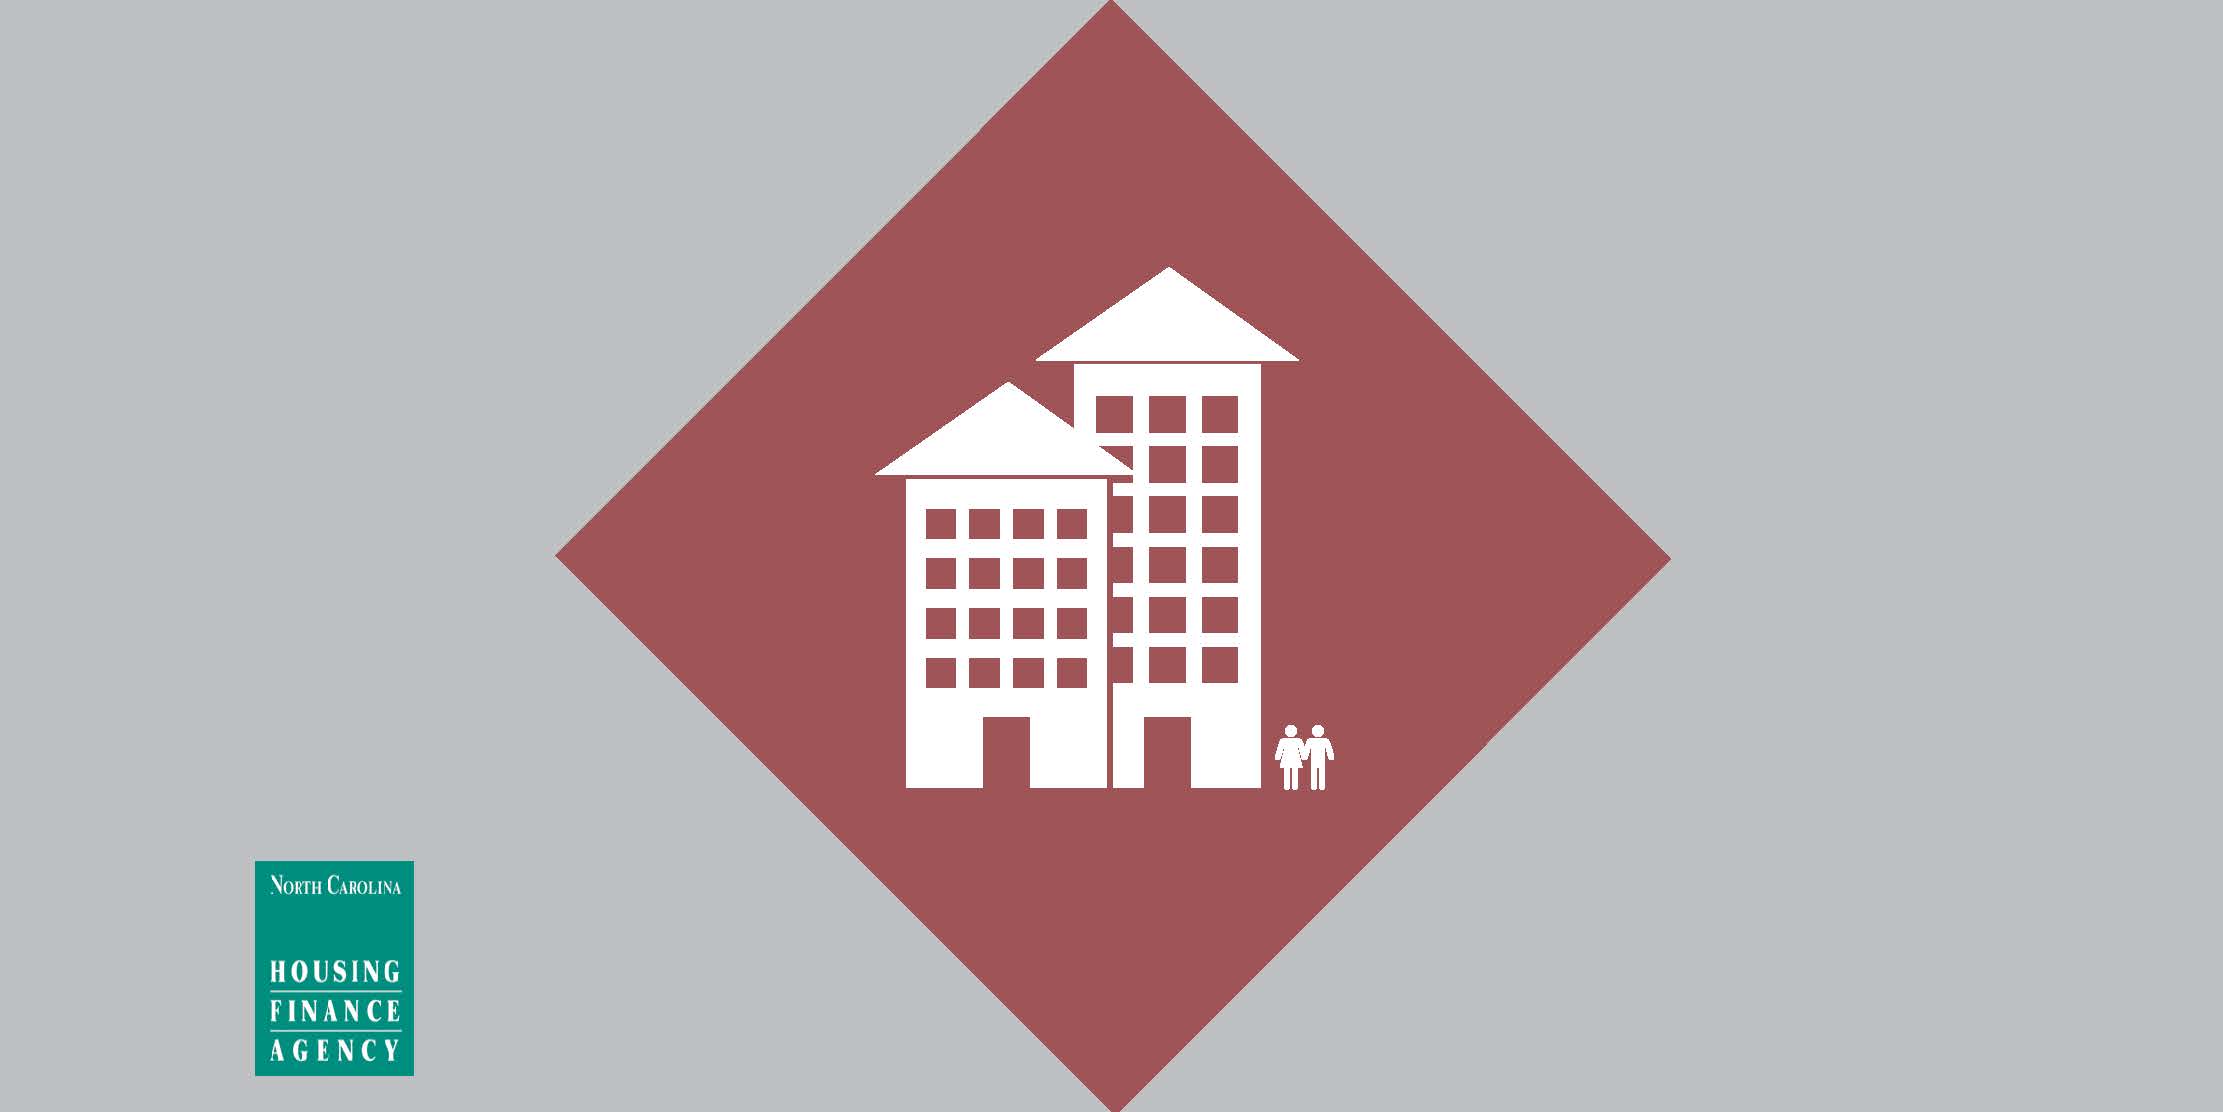 Red diamond graphic with apartments in center